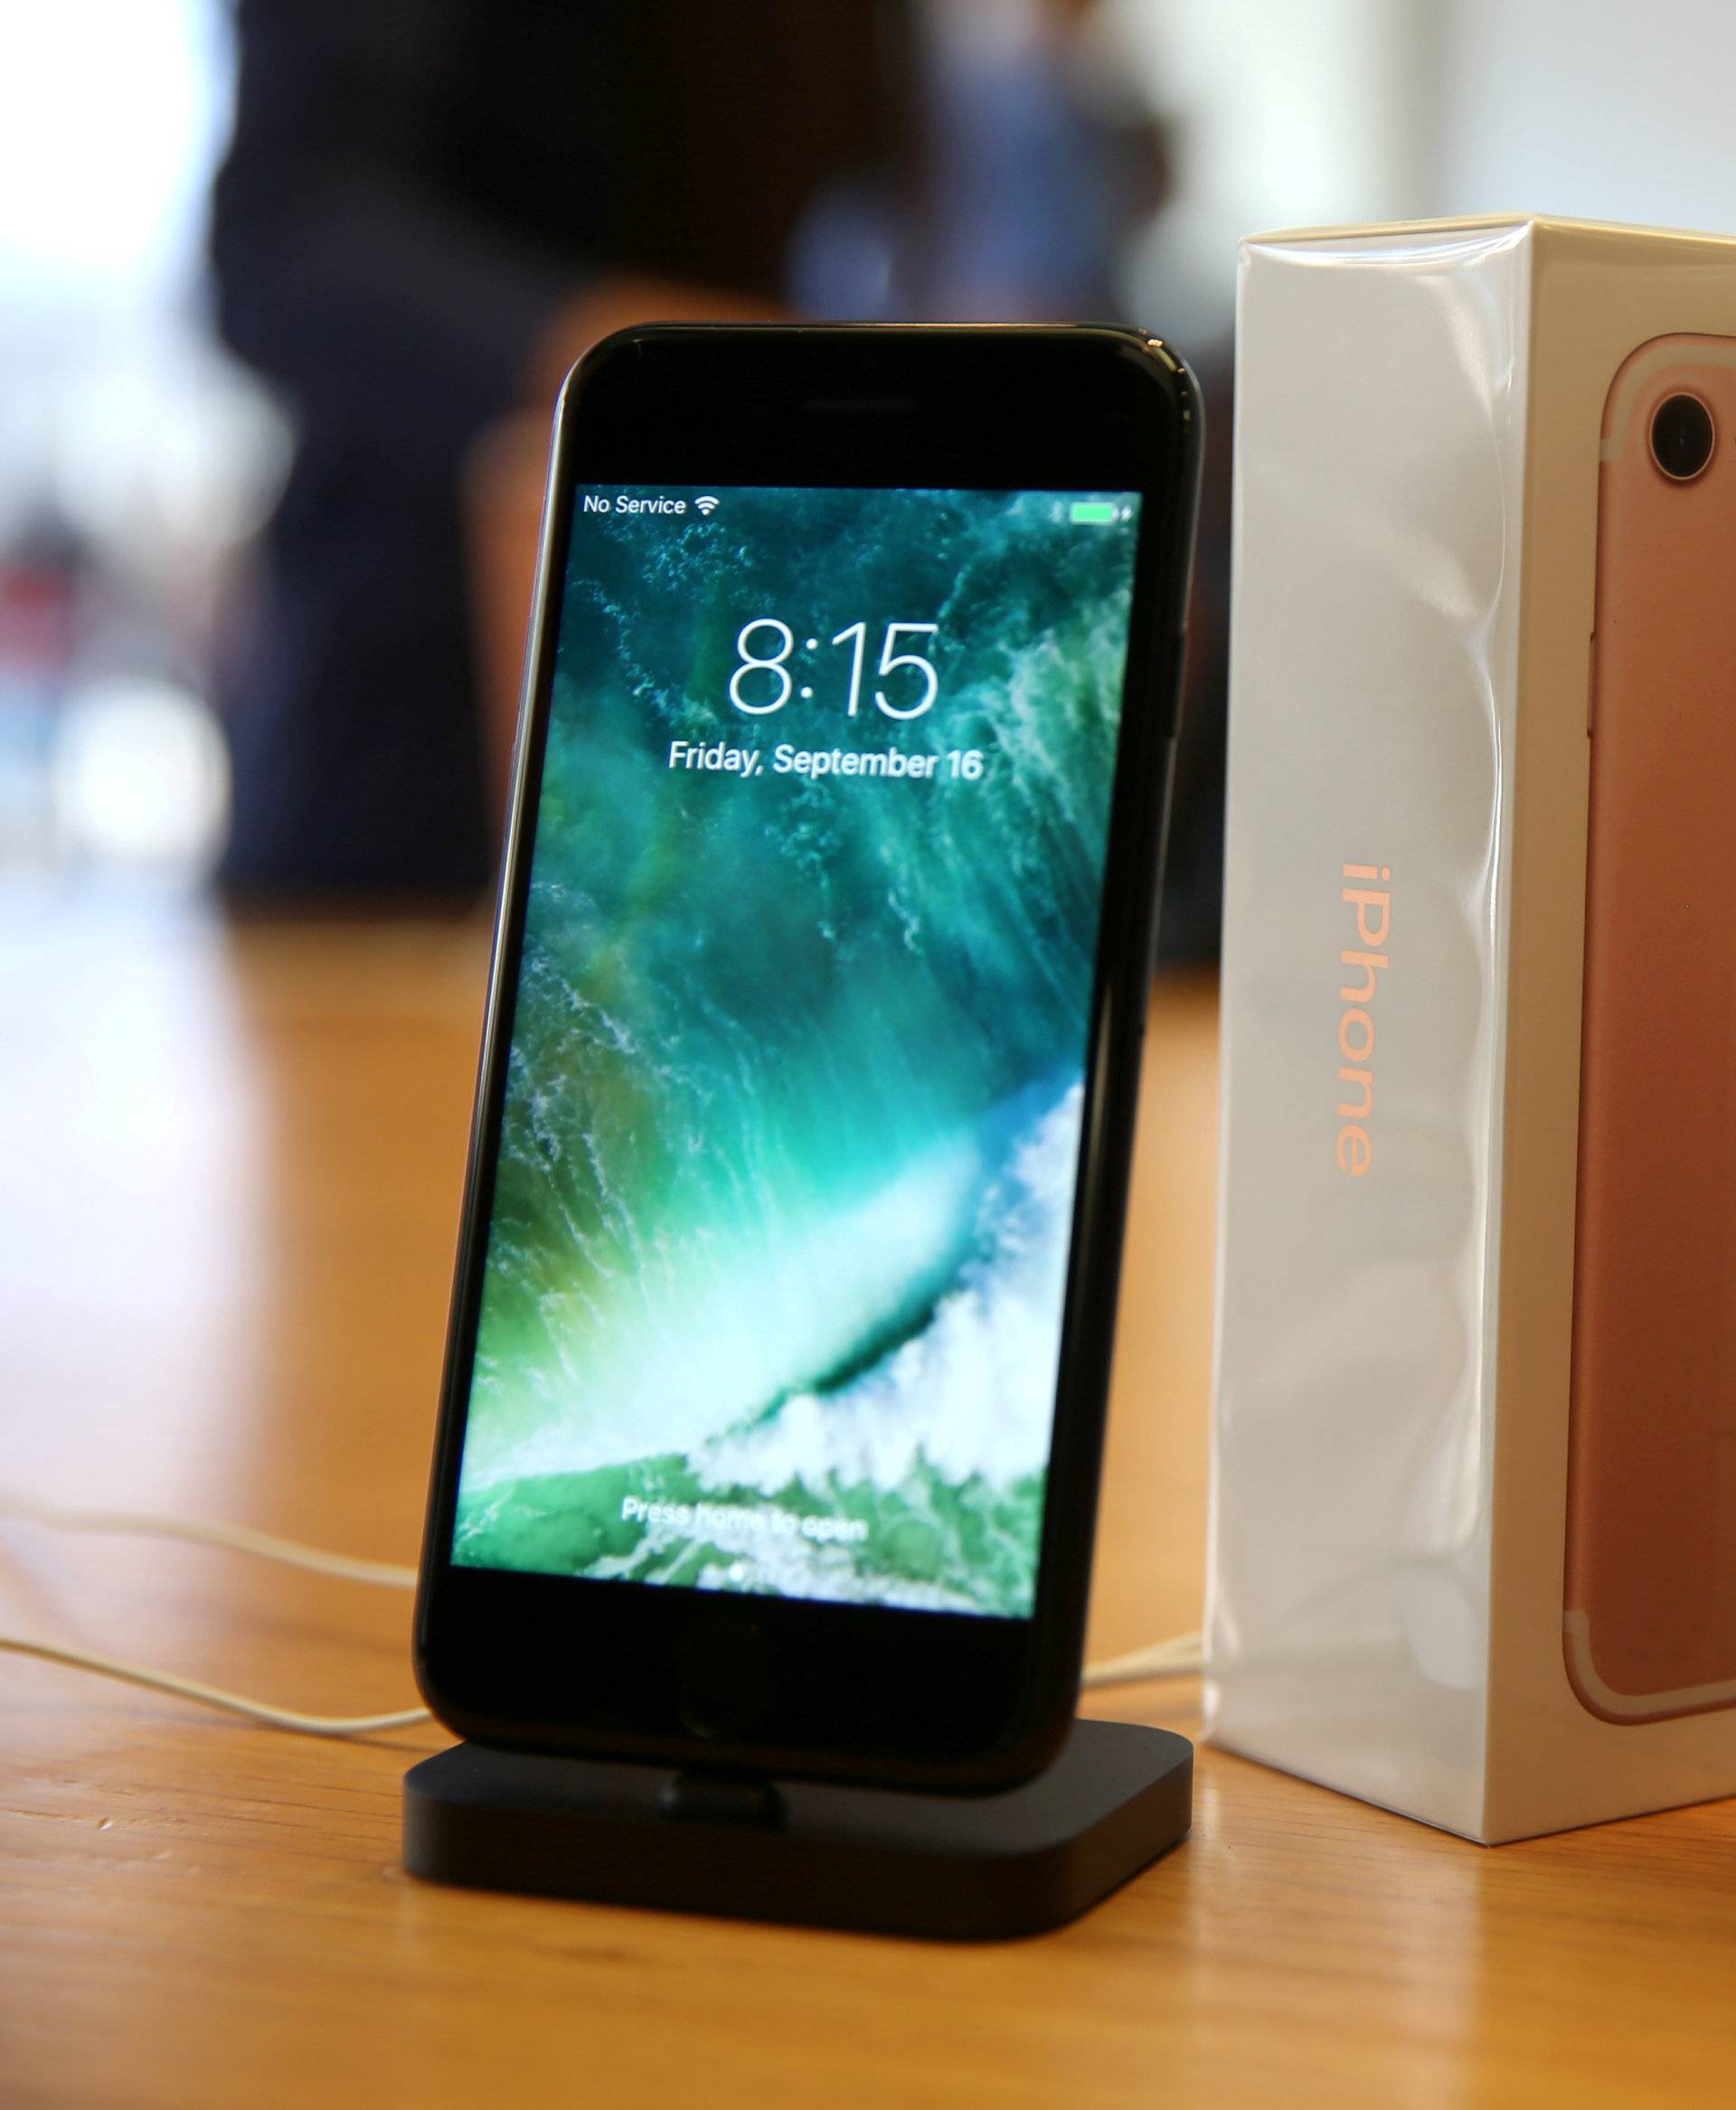 The new iPhone 7 smartphone goes on sale inside an Apple Inc. store in Los Angeles